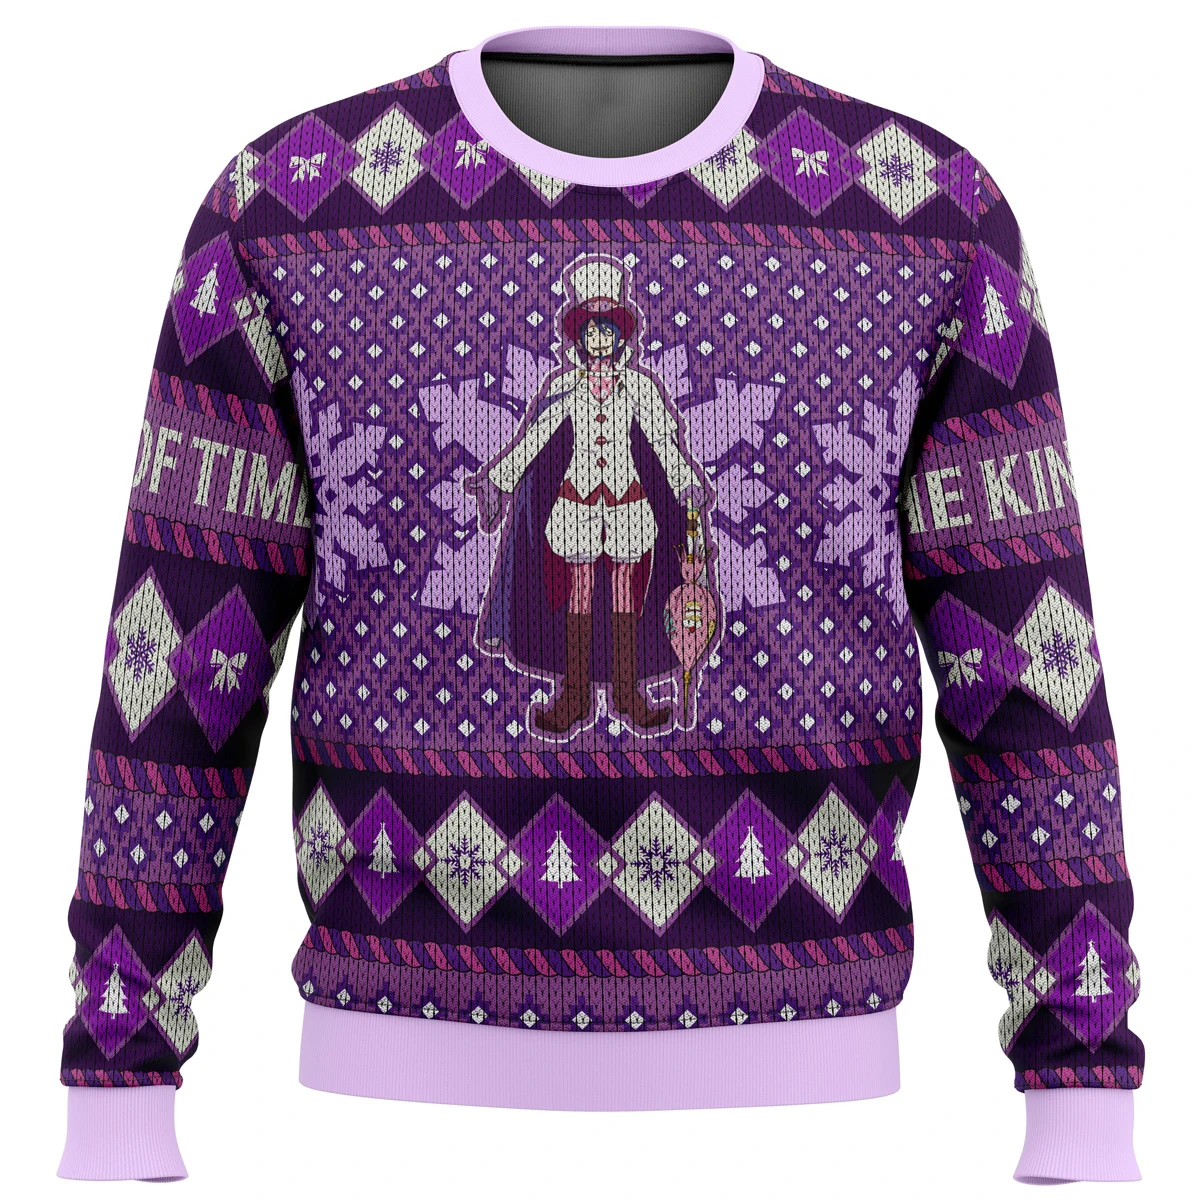 

Mephisto Pheles Blue Exorcist Ugly Christmas Sweater Christmas Sweater gift Santa Claus pullover men 3D Sweatshirt and top autum